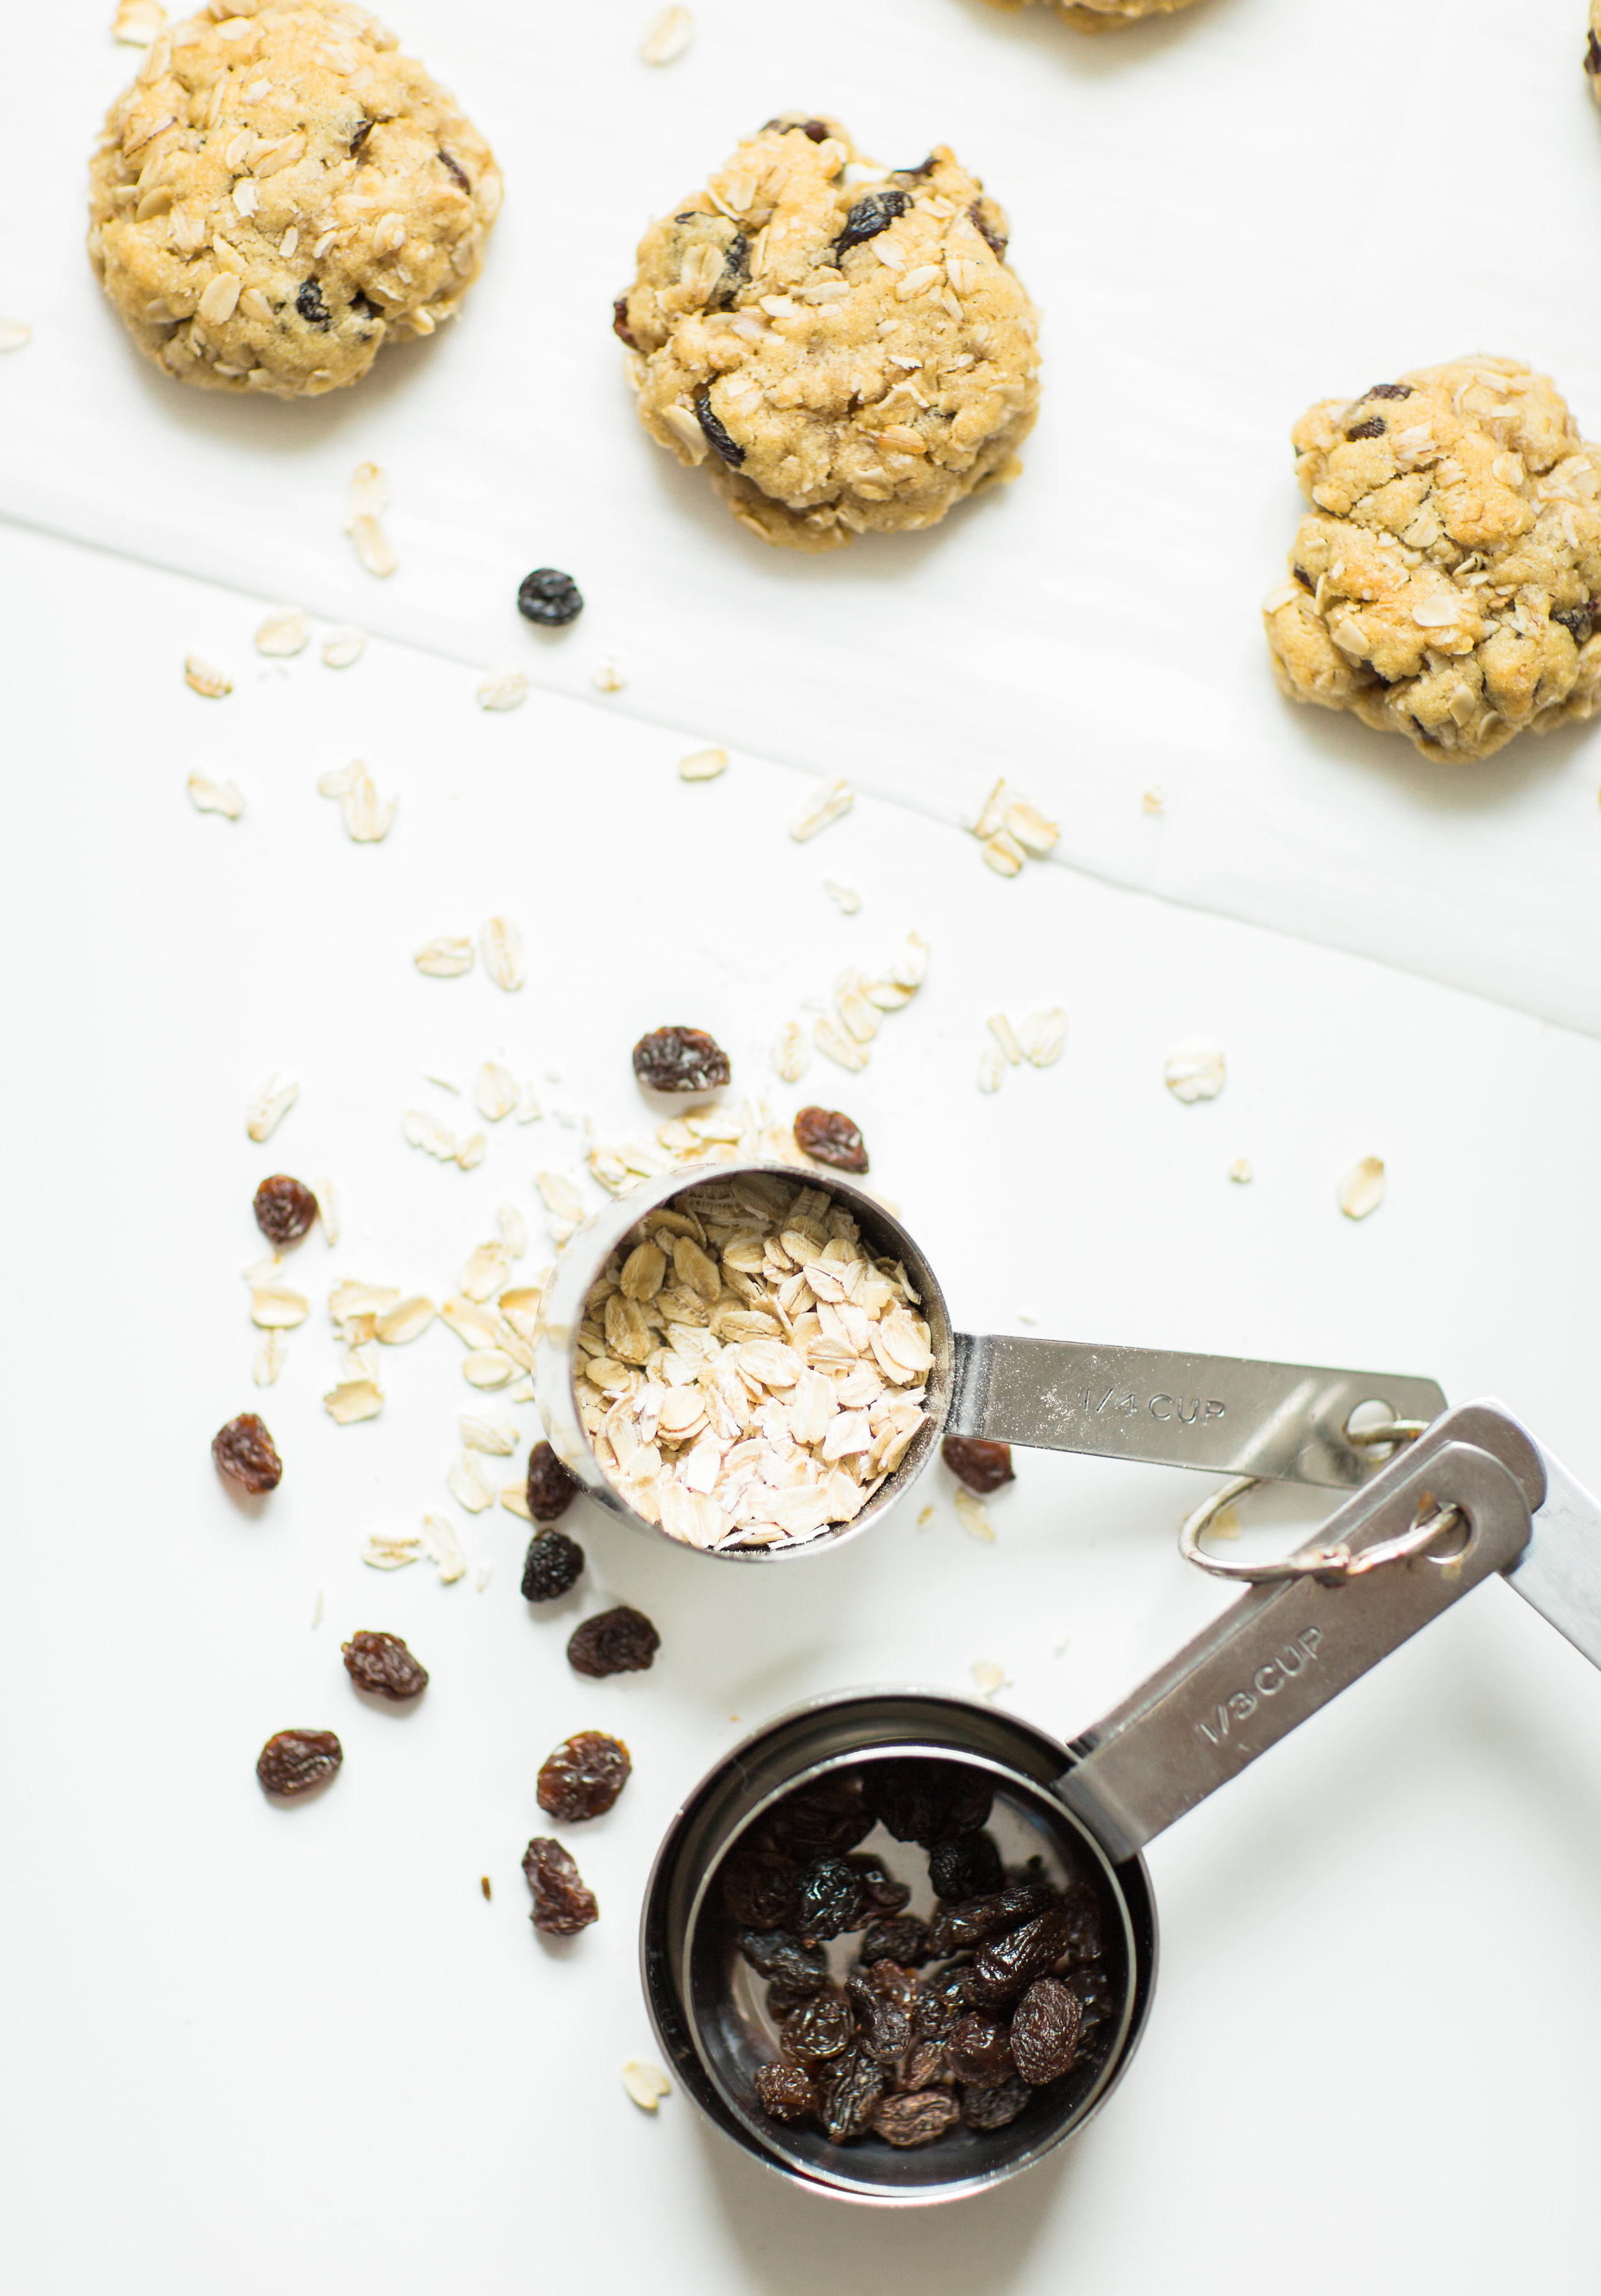 I've found the perfect oatmeal cookies for our family. Crispy on the outside and super soft on the inside, they taste just slightly under-baked; and, bonus - they're dairy-free and can be made gluten-free.Click through for the recipe. | glitterinc.com | @glitterinc